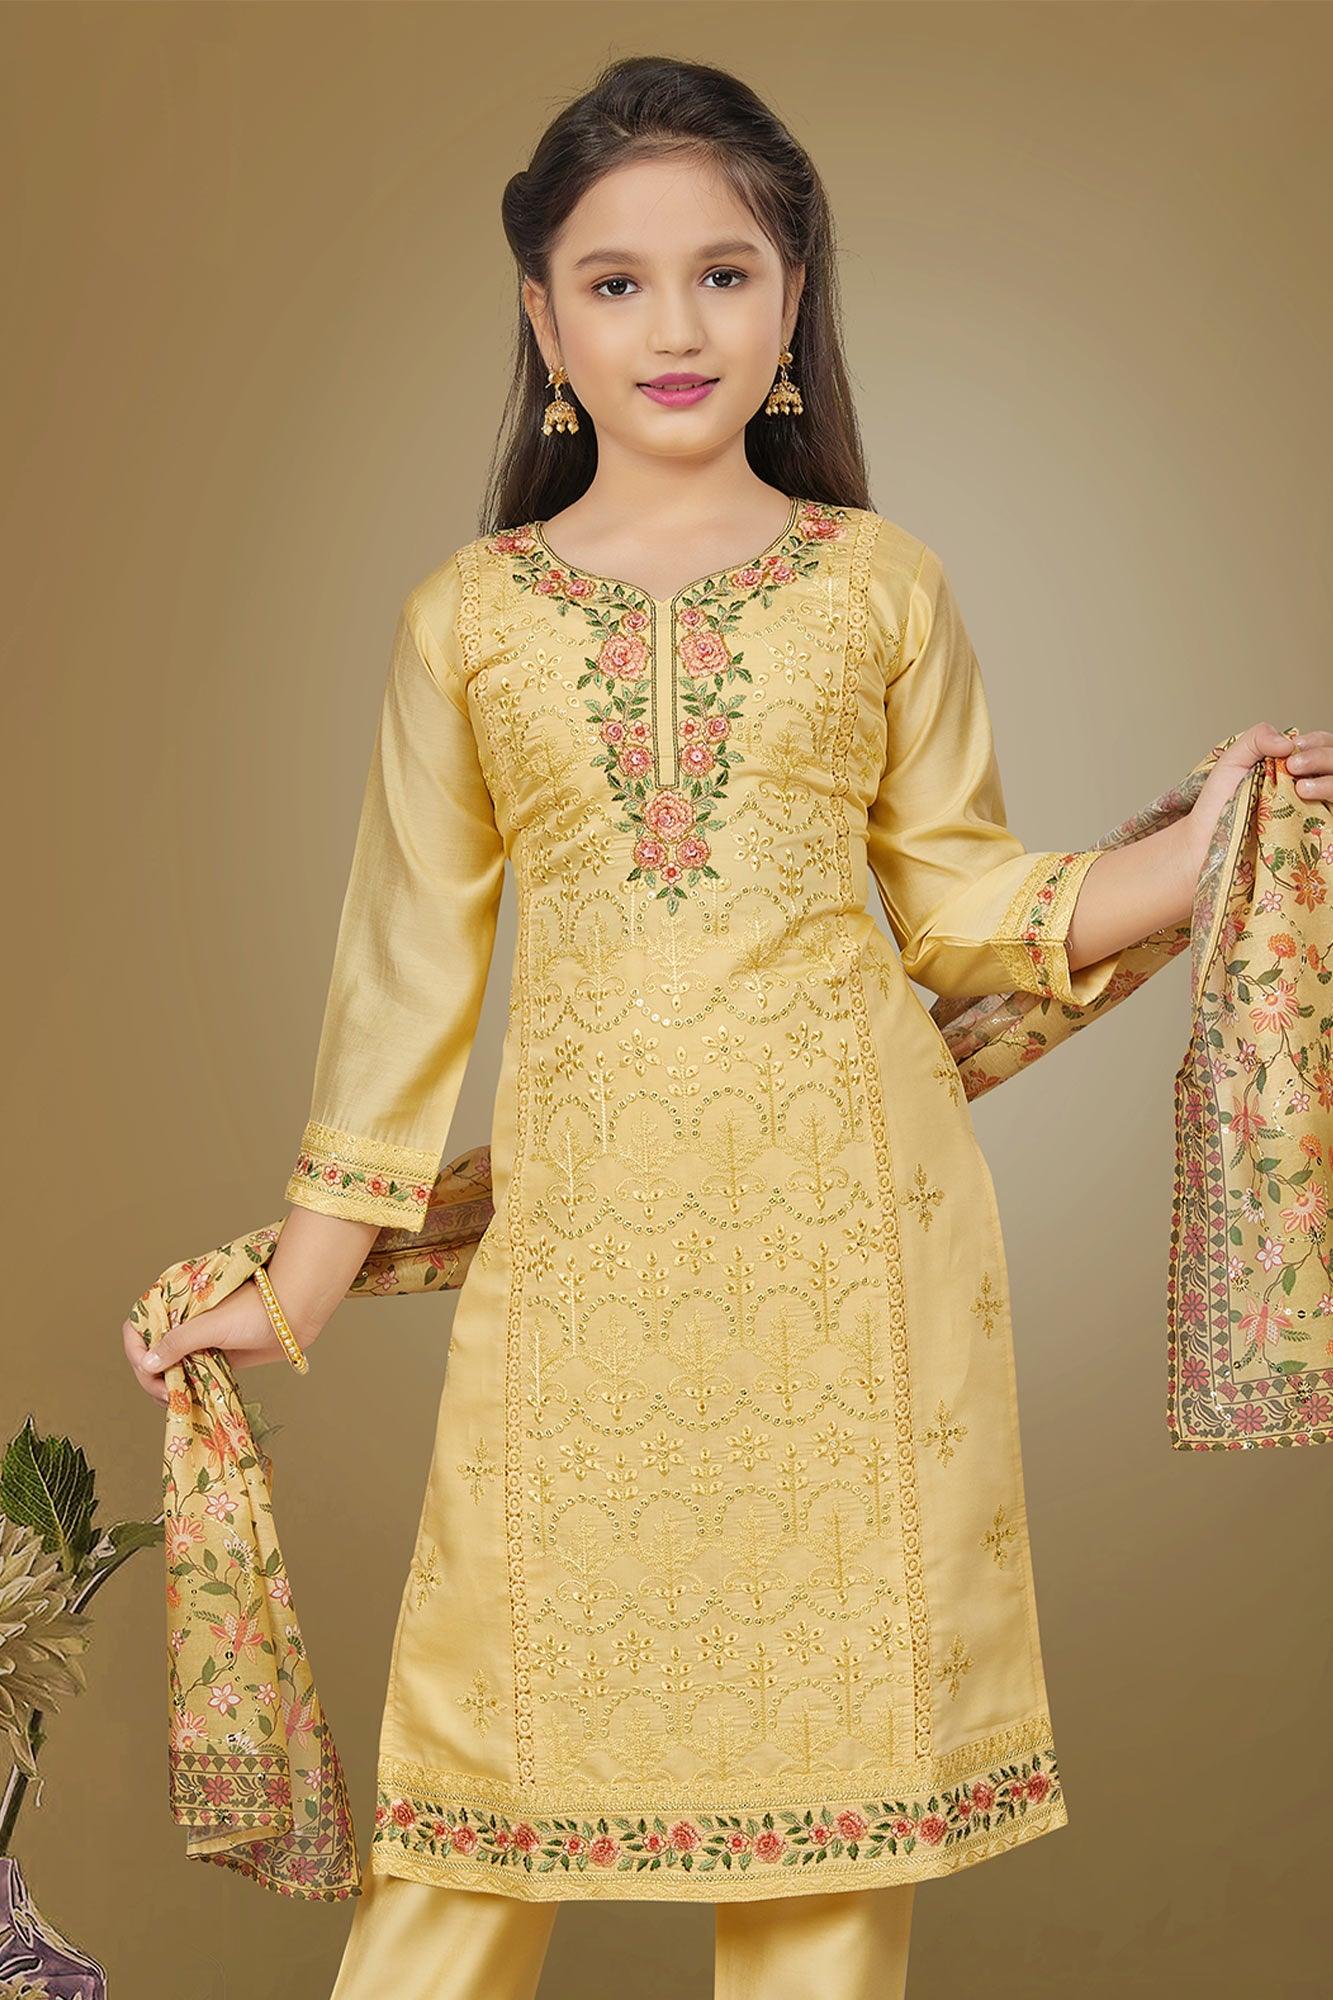 Buy DnVeens Women Cotton Silk Fancy Chudidar Embroidery Unstitched Salwar  Kameez Dress Material for Women at Amazon.in